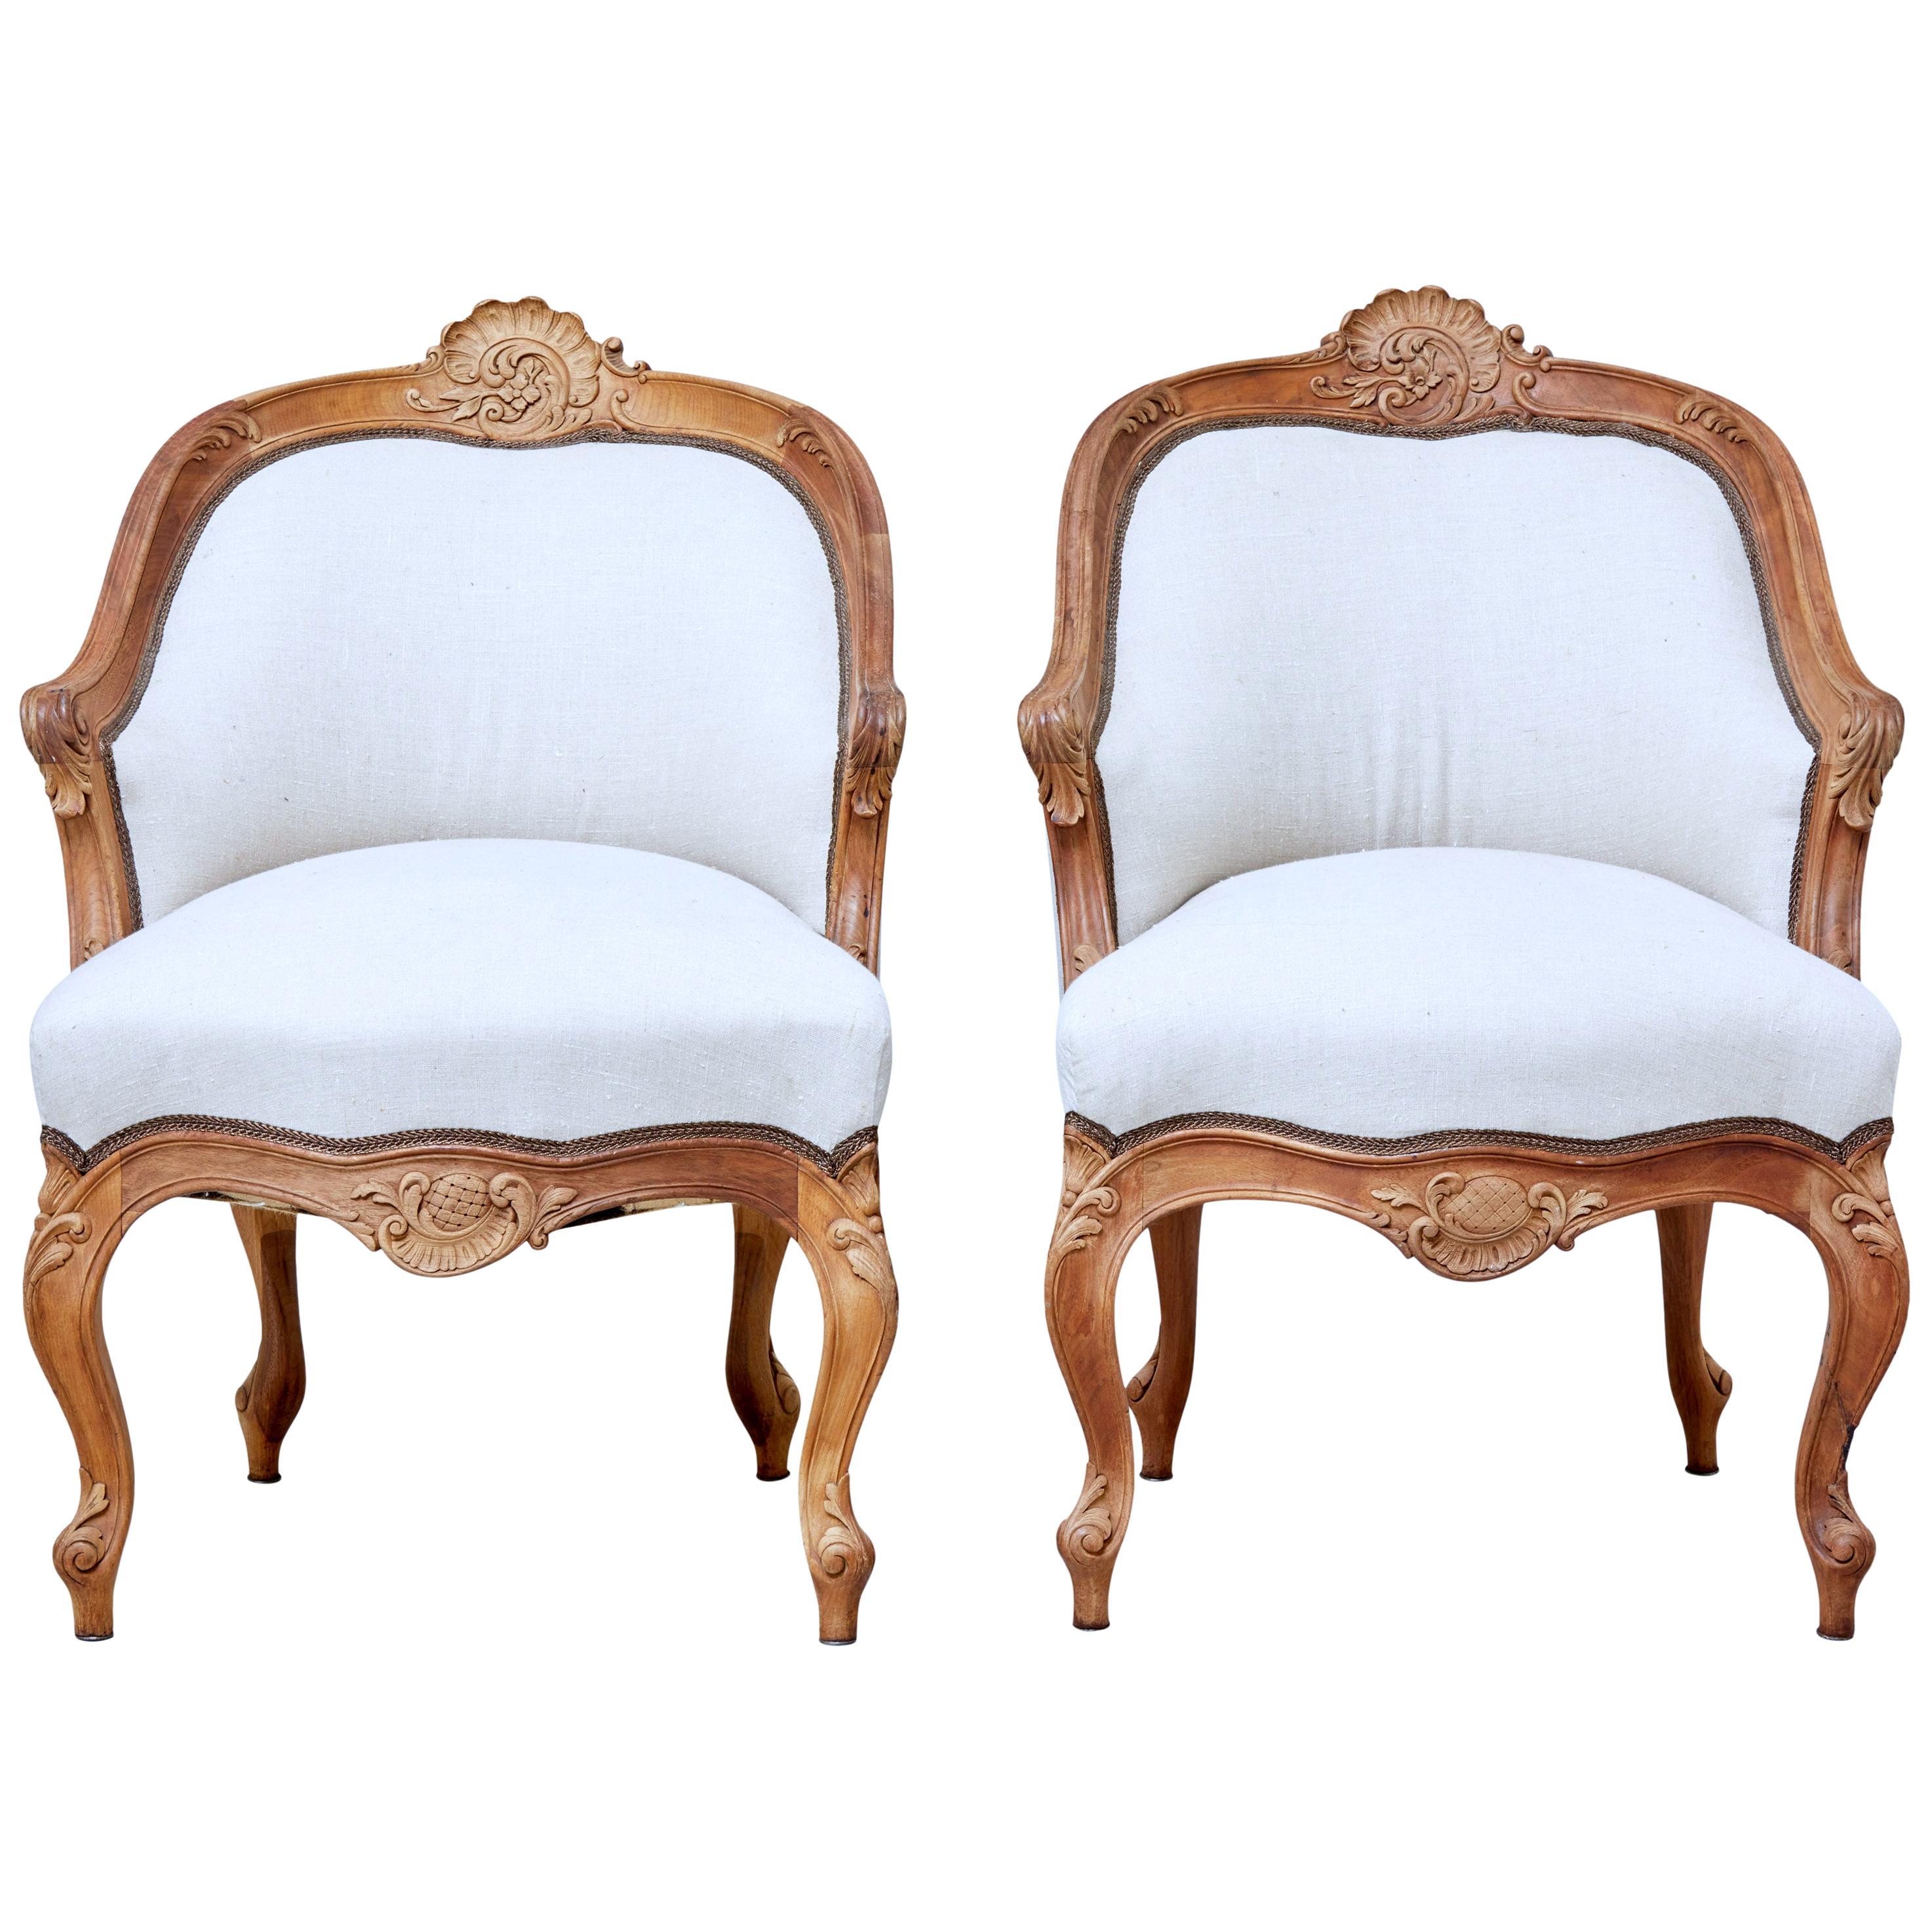 Pair of Late 19th Century French Walnut Armchairs